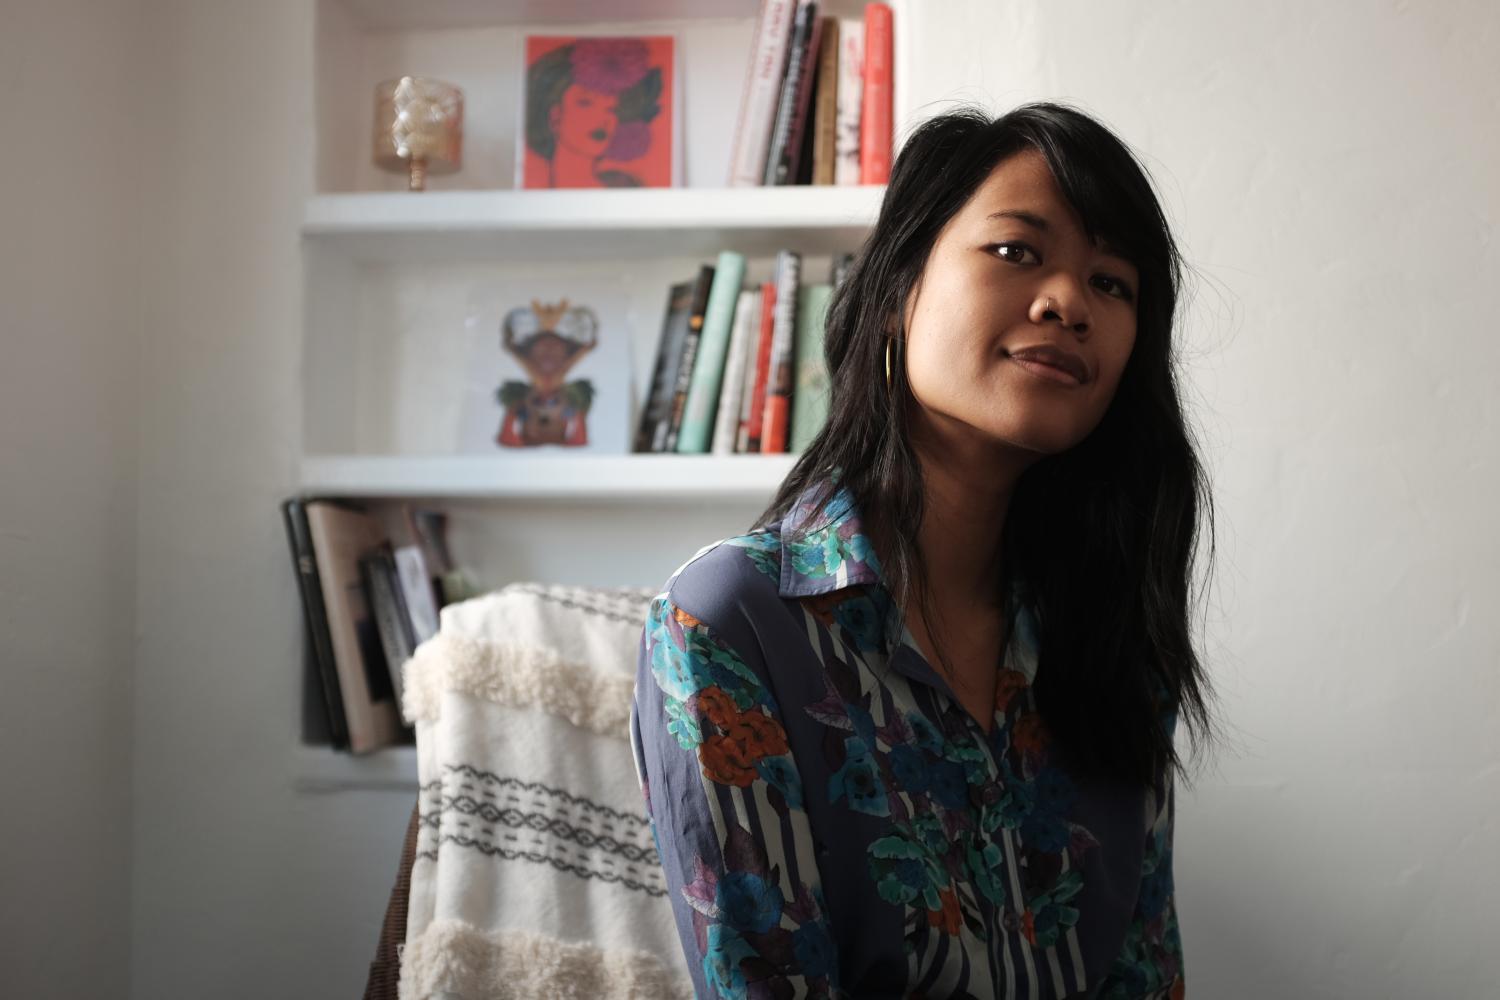 Portrait of Natalie Bui in front of a bookshelf.